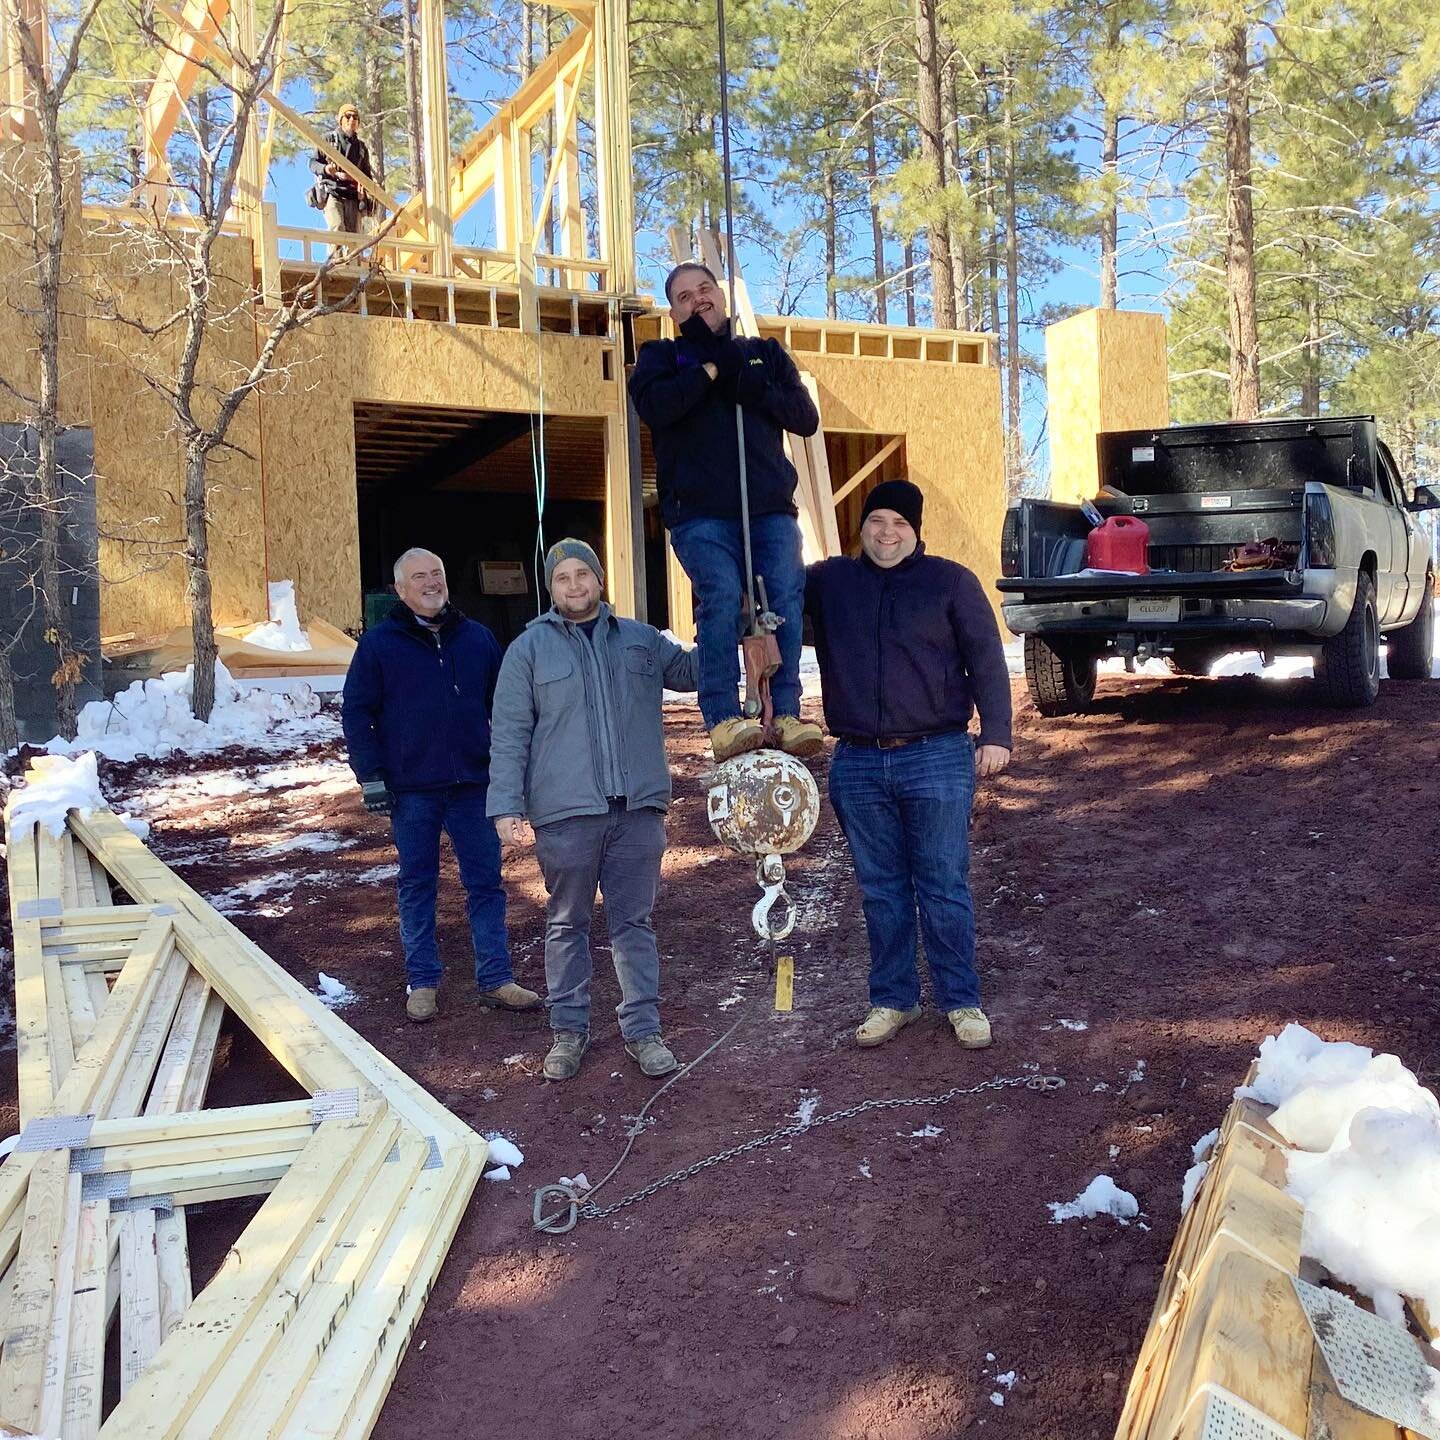 I CAME IN LIKE A WRECKING BALL

We like to have a bit of fun on the job sites sometimes! Trusses and a beam were put on yesterday for our new build in Flagstaff Ranch ✅ Thank goodness most of the snow melted and we could get back to work! This house 